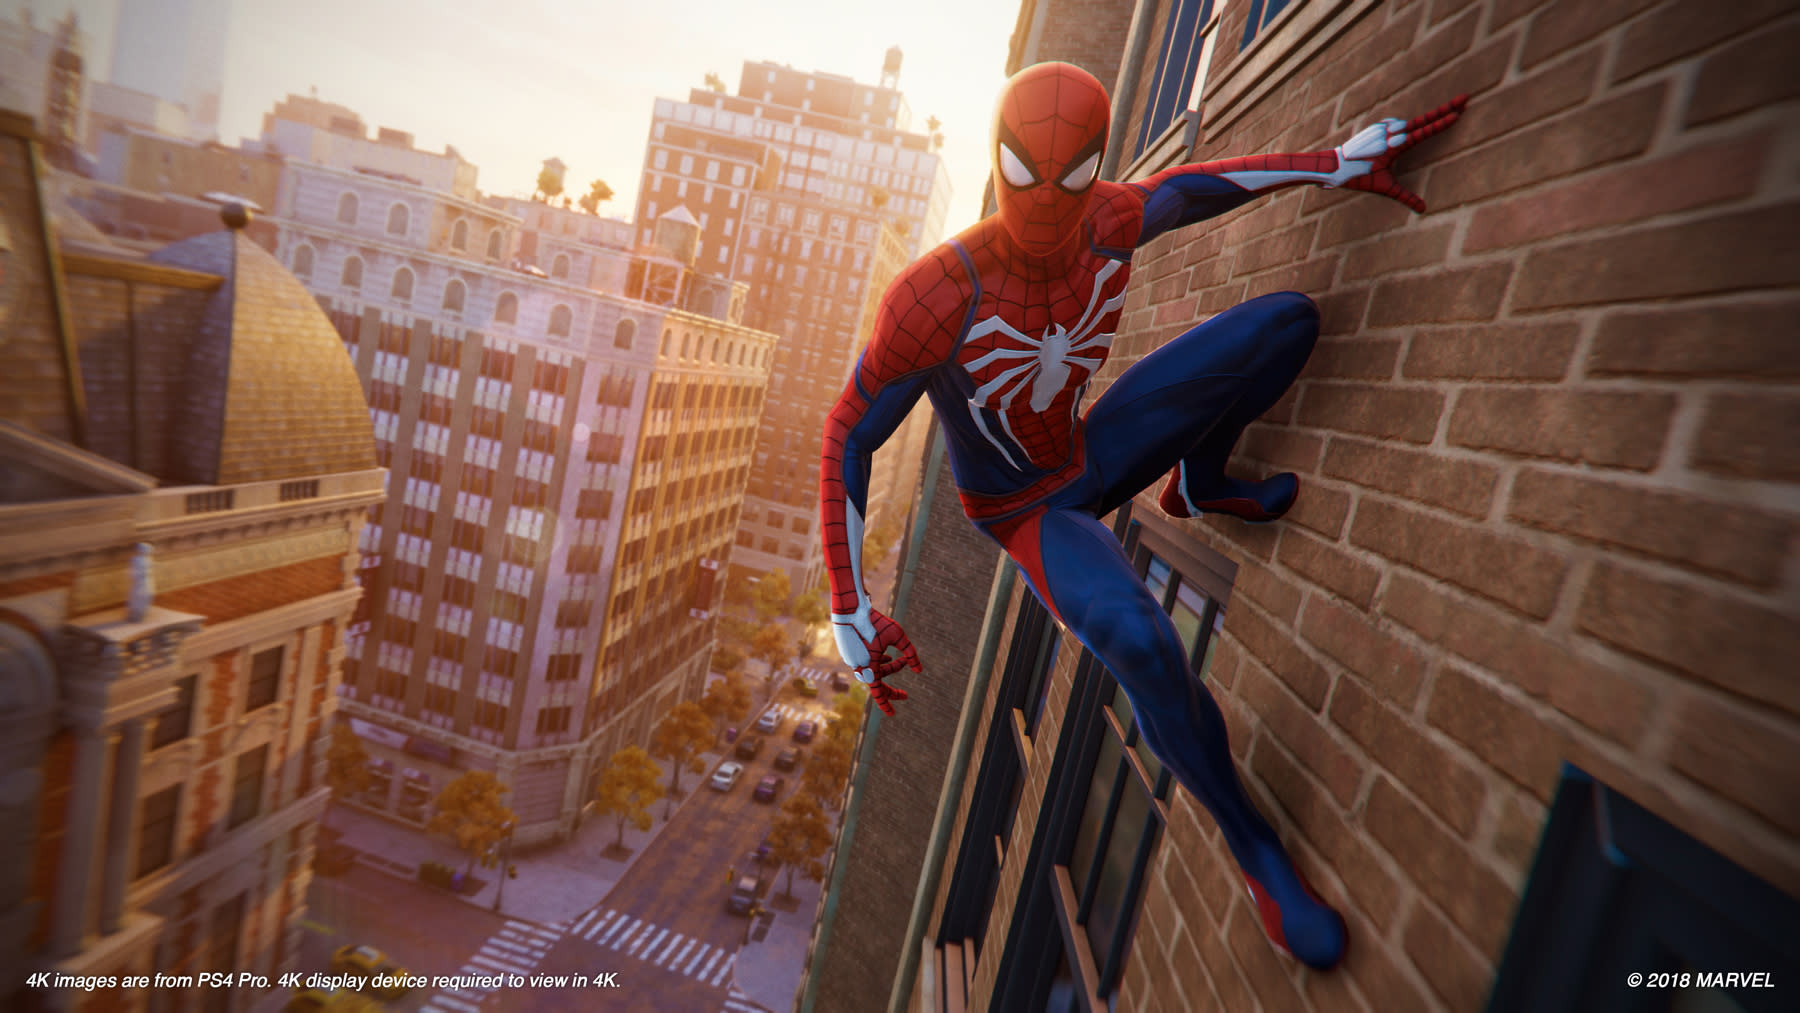 New York shines in Sony’s new ‘SpiderMan’ game Engadget